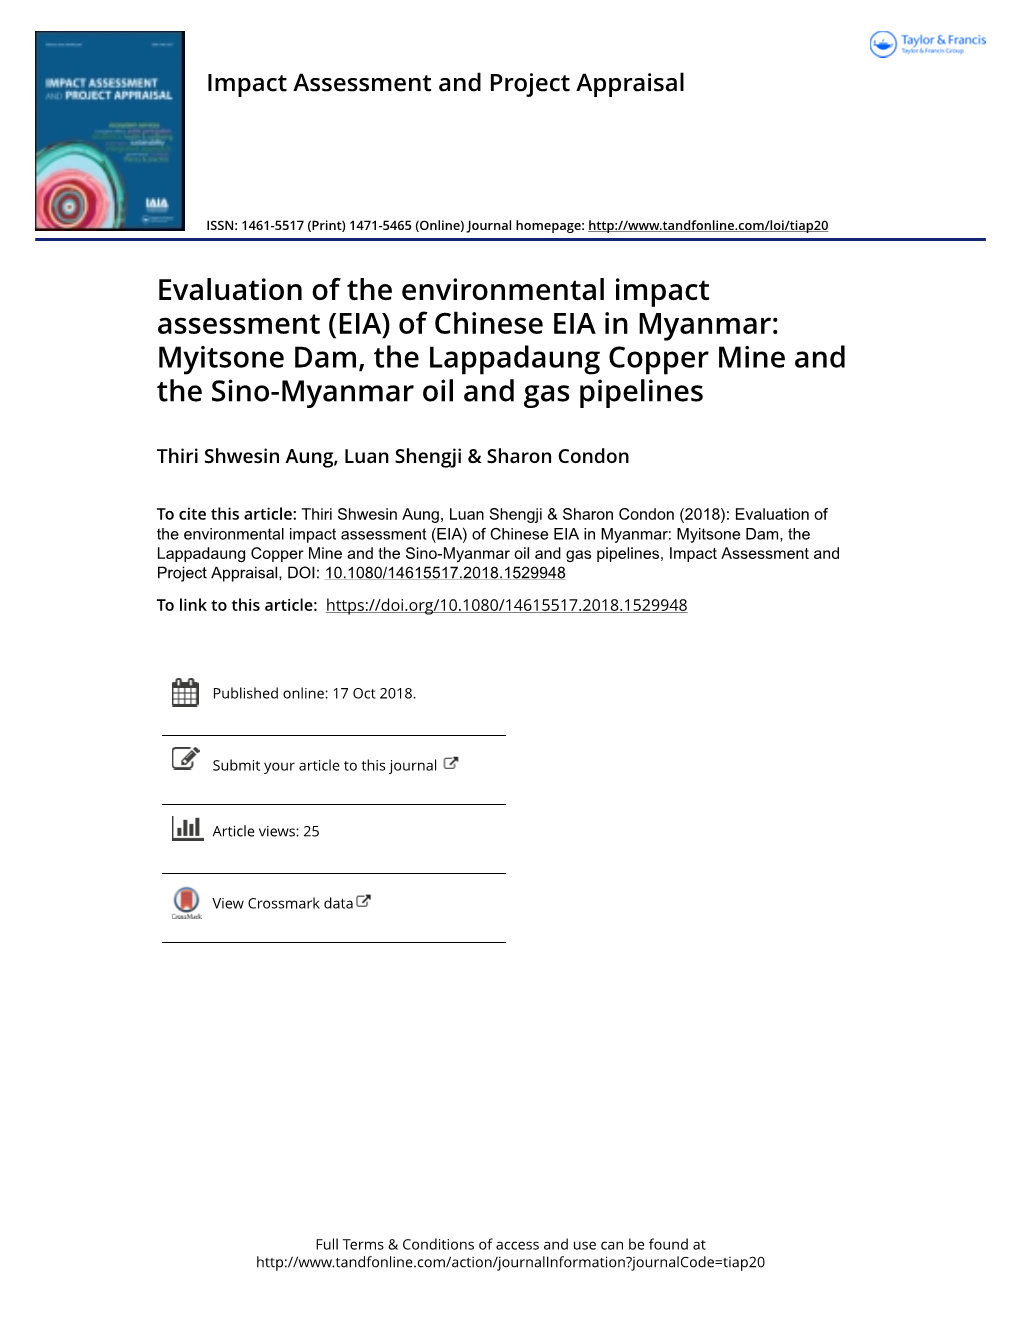 Evaluation of the Environmental Impact Assessment (EIA) of Chinese EIA in Myanmar: Myitsone Dam, the Lappadaung Copper Mine and the Sino-Myanmar Oil and Gas Pipelines